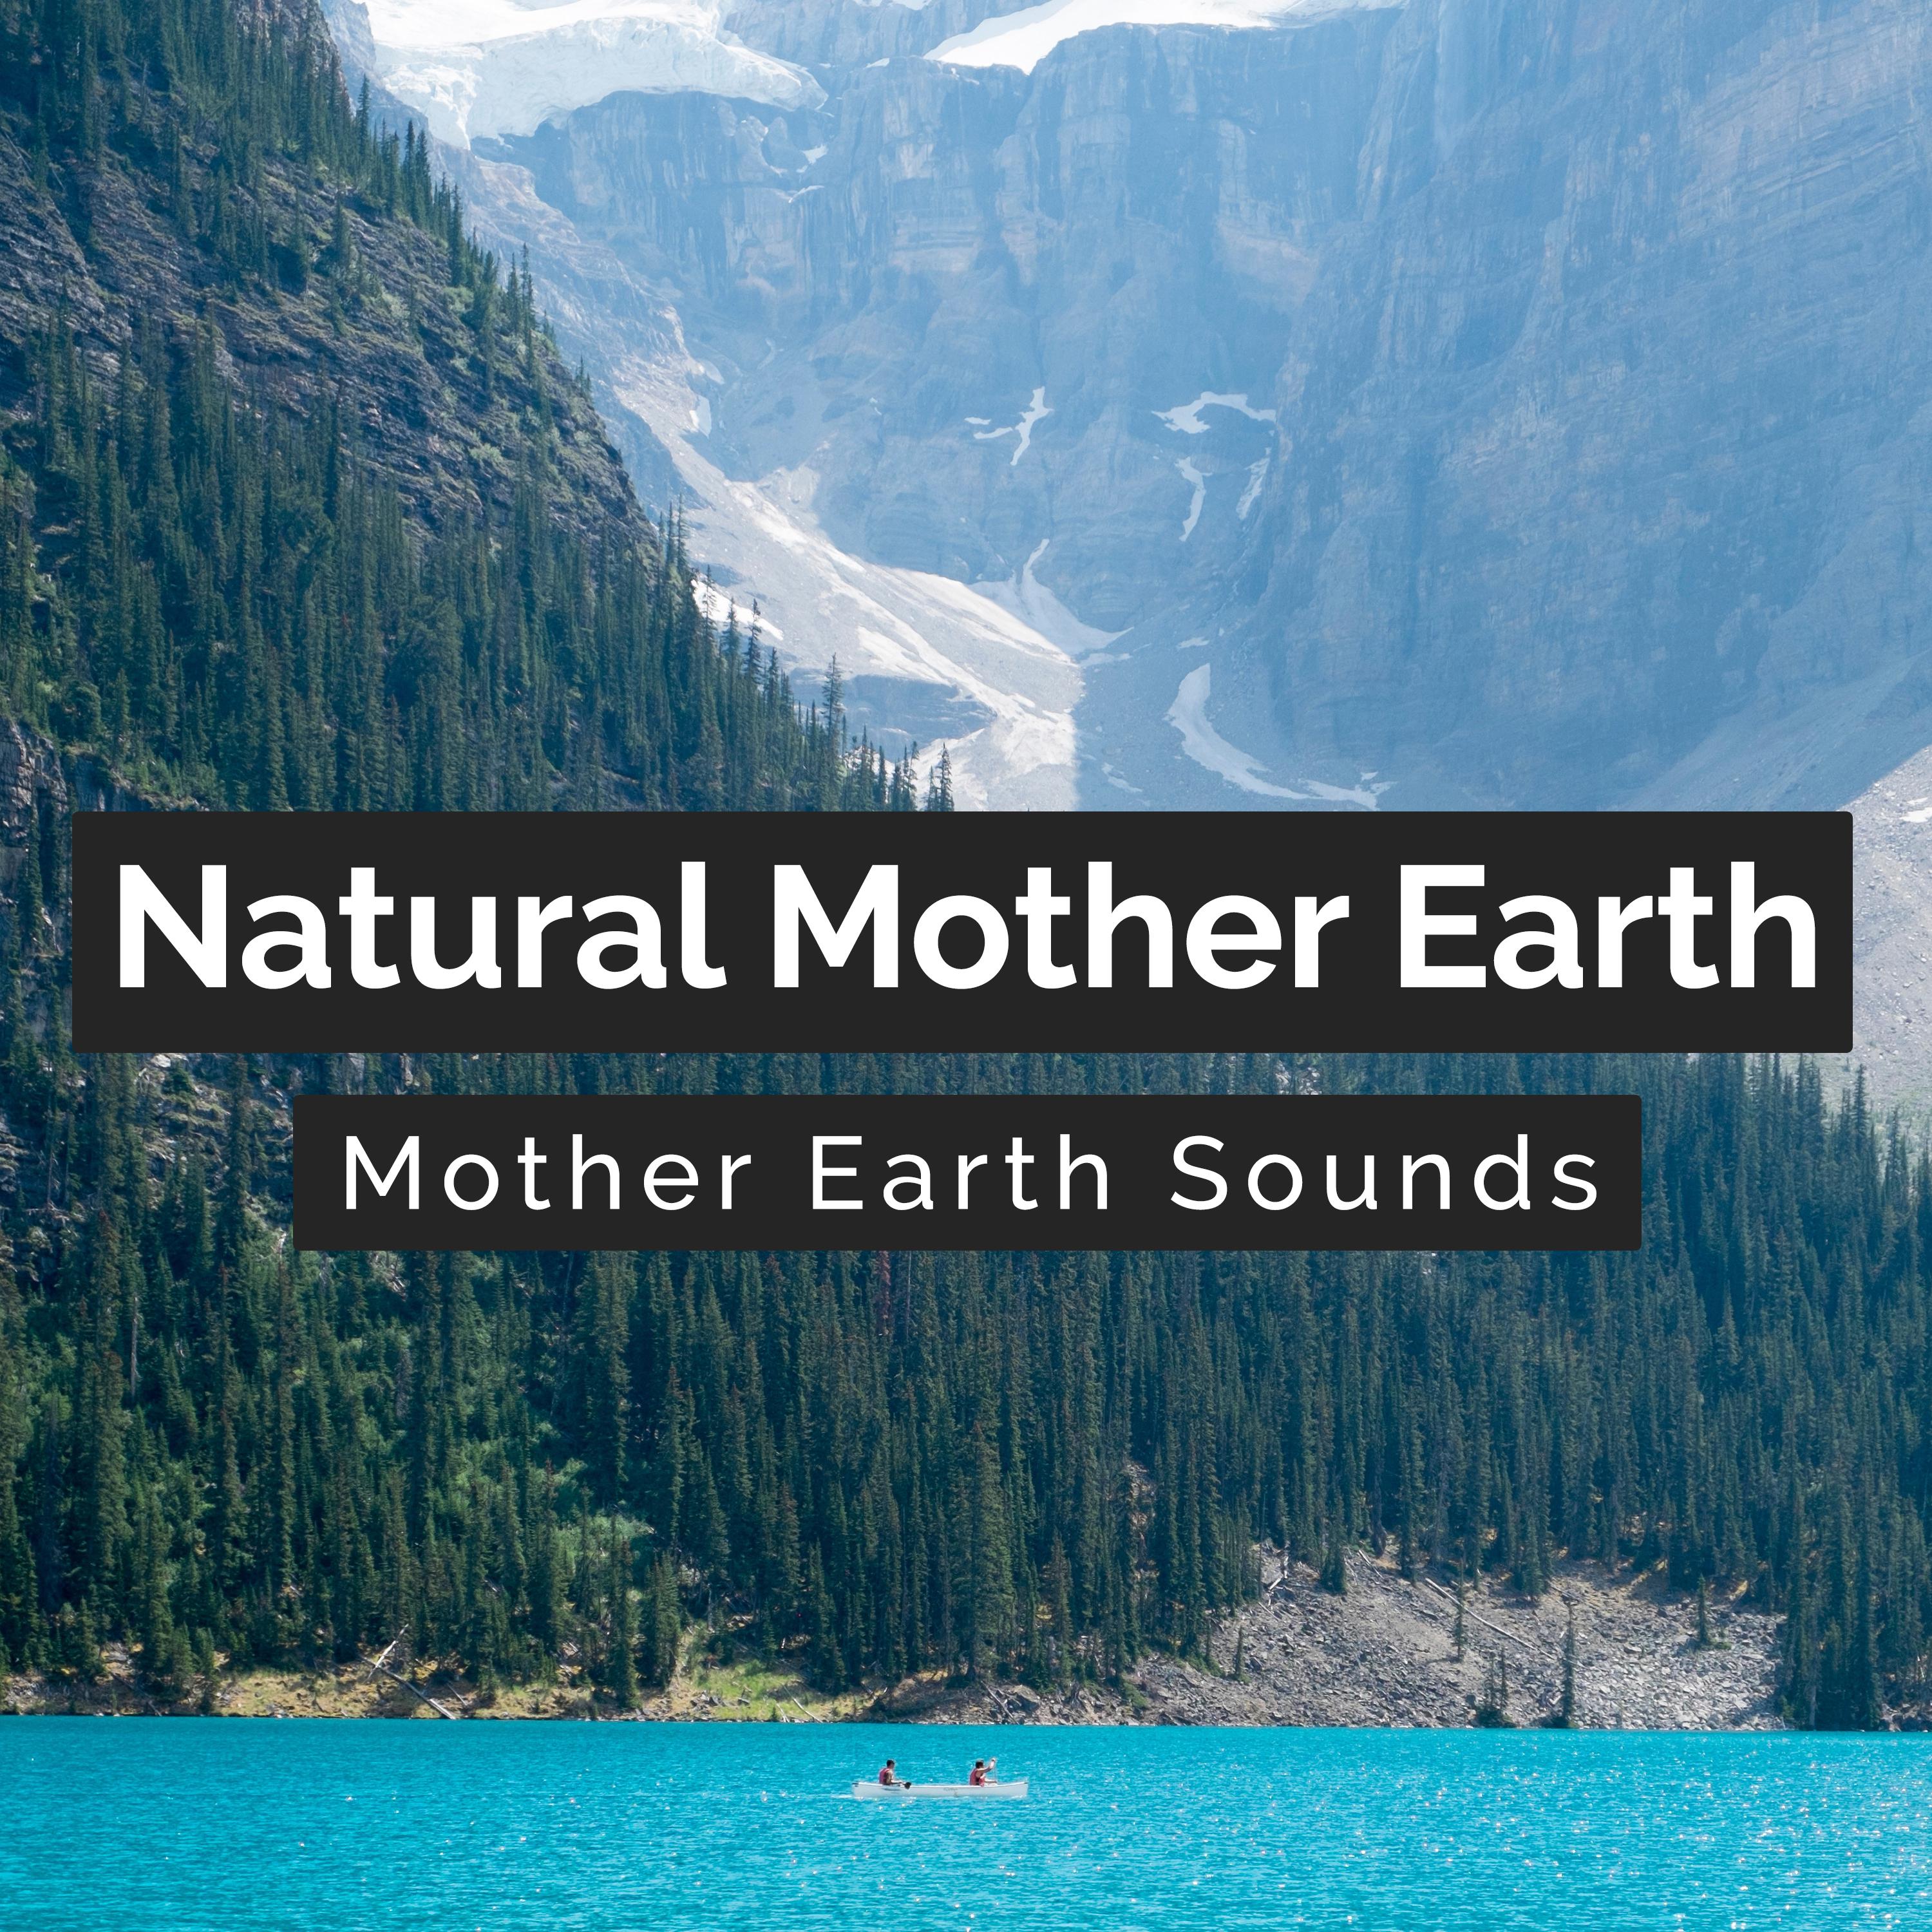 Mother Earth Sounds - Ambiance Birds